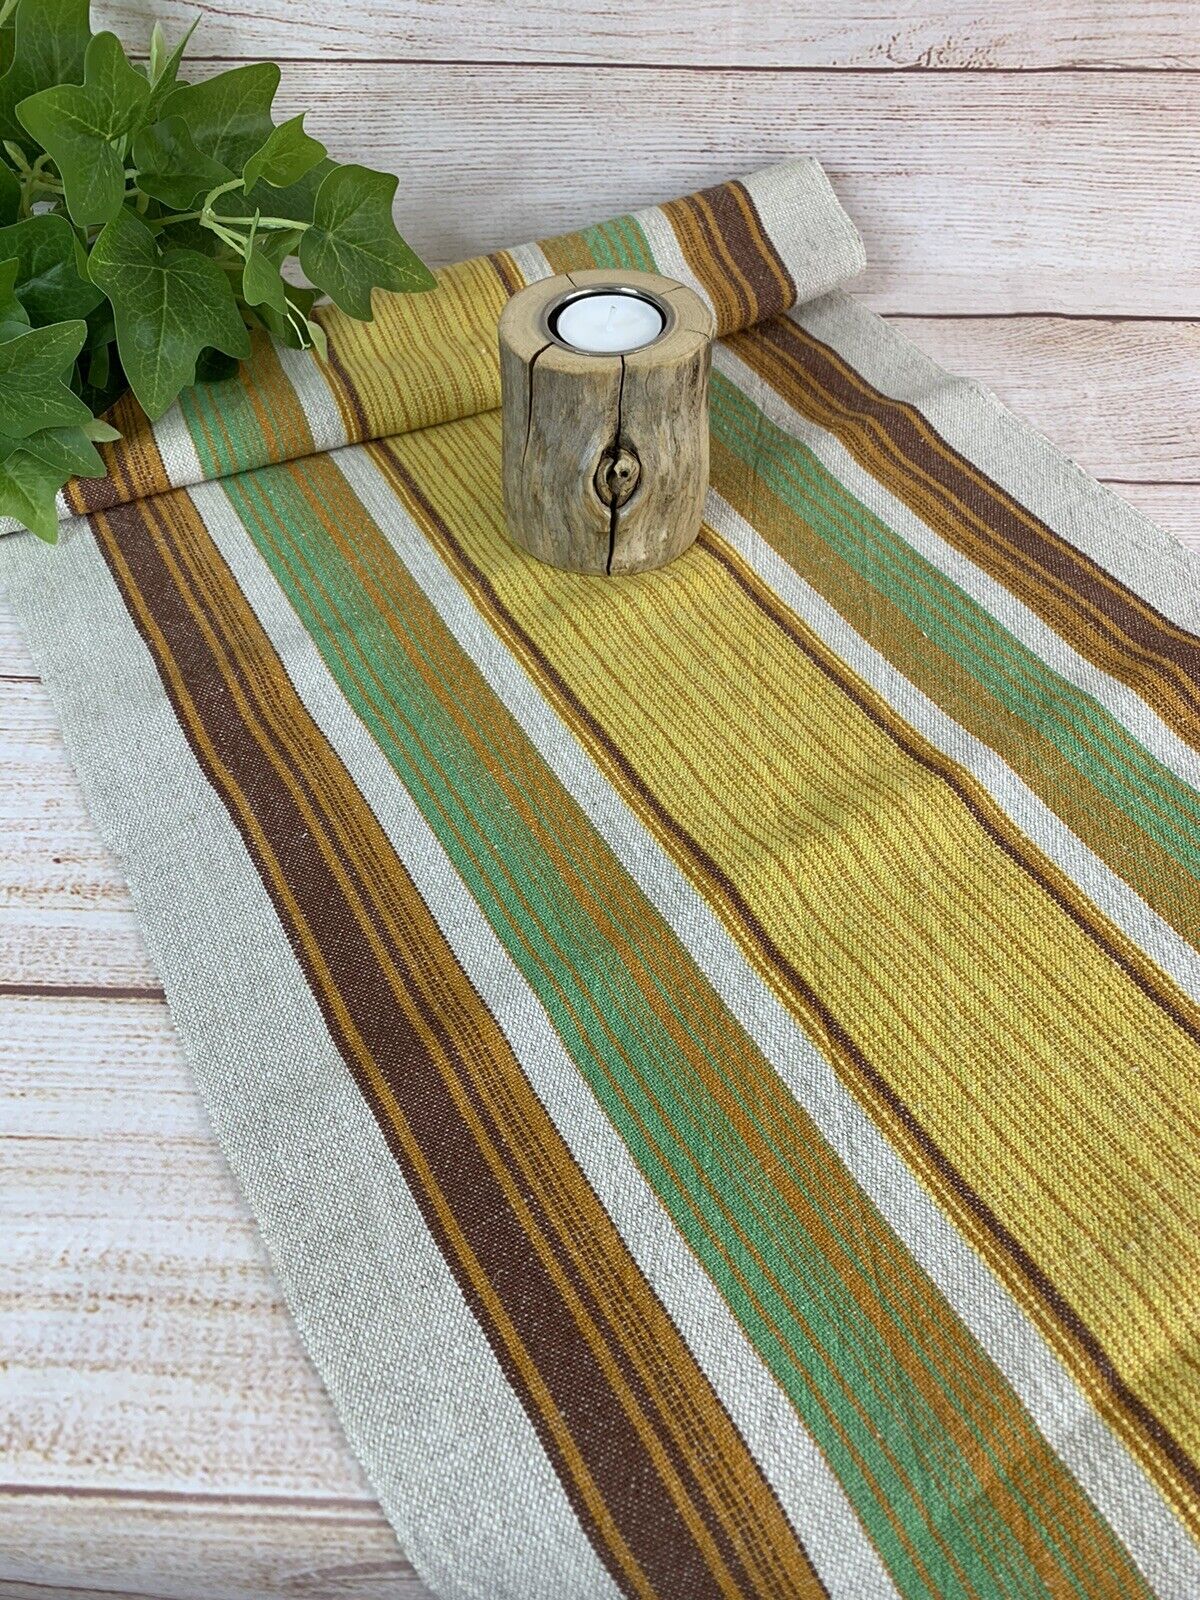 Swedish Vintage Hand Woven Striped Table Runner Natural Brown Green Yellow 52x16